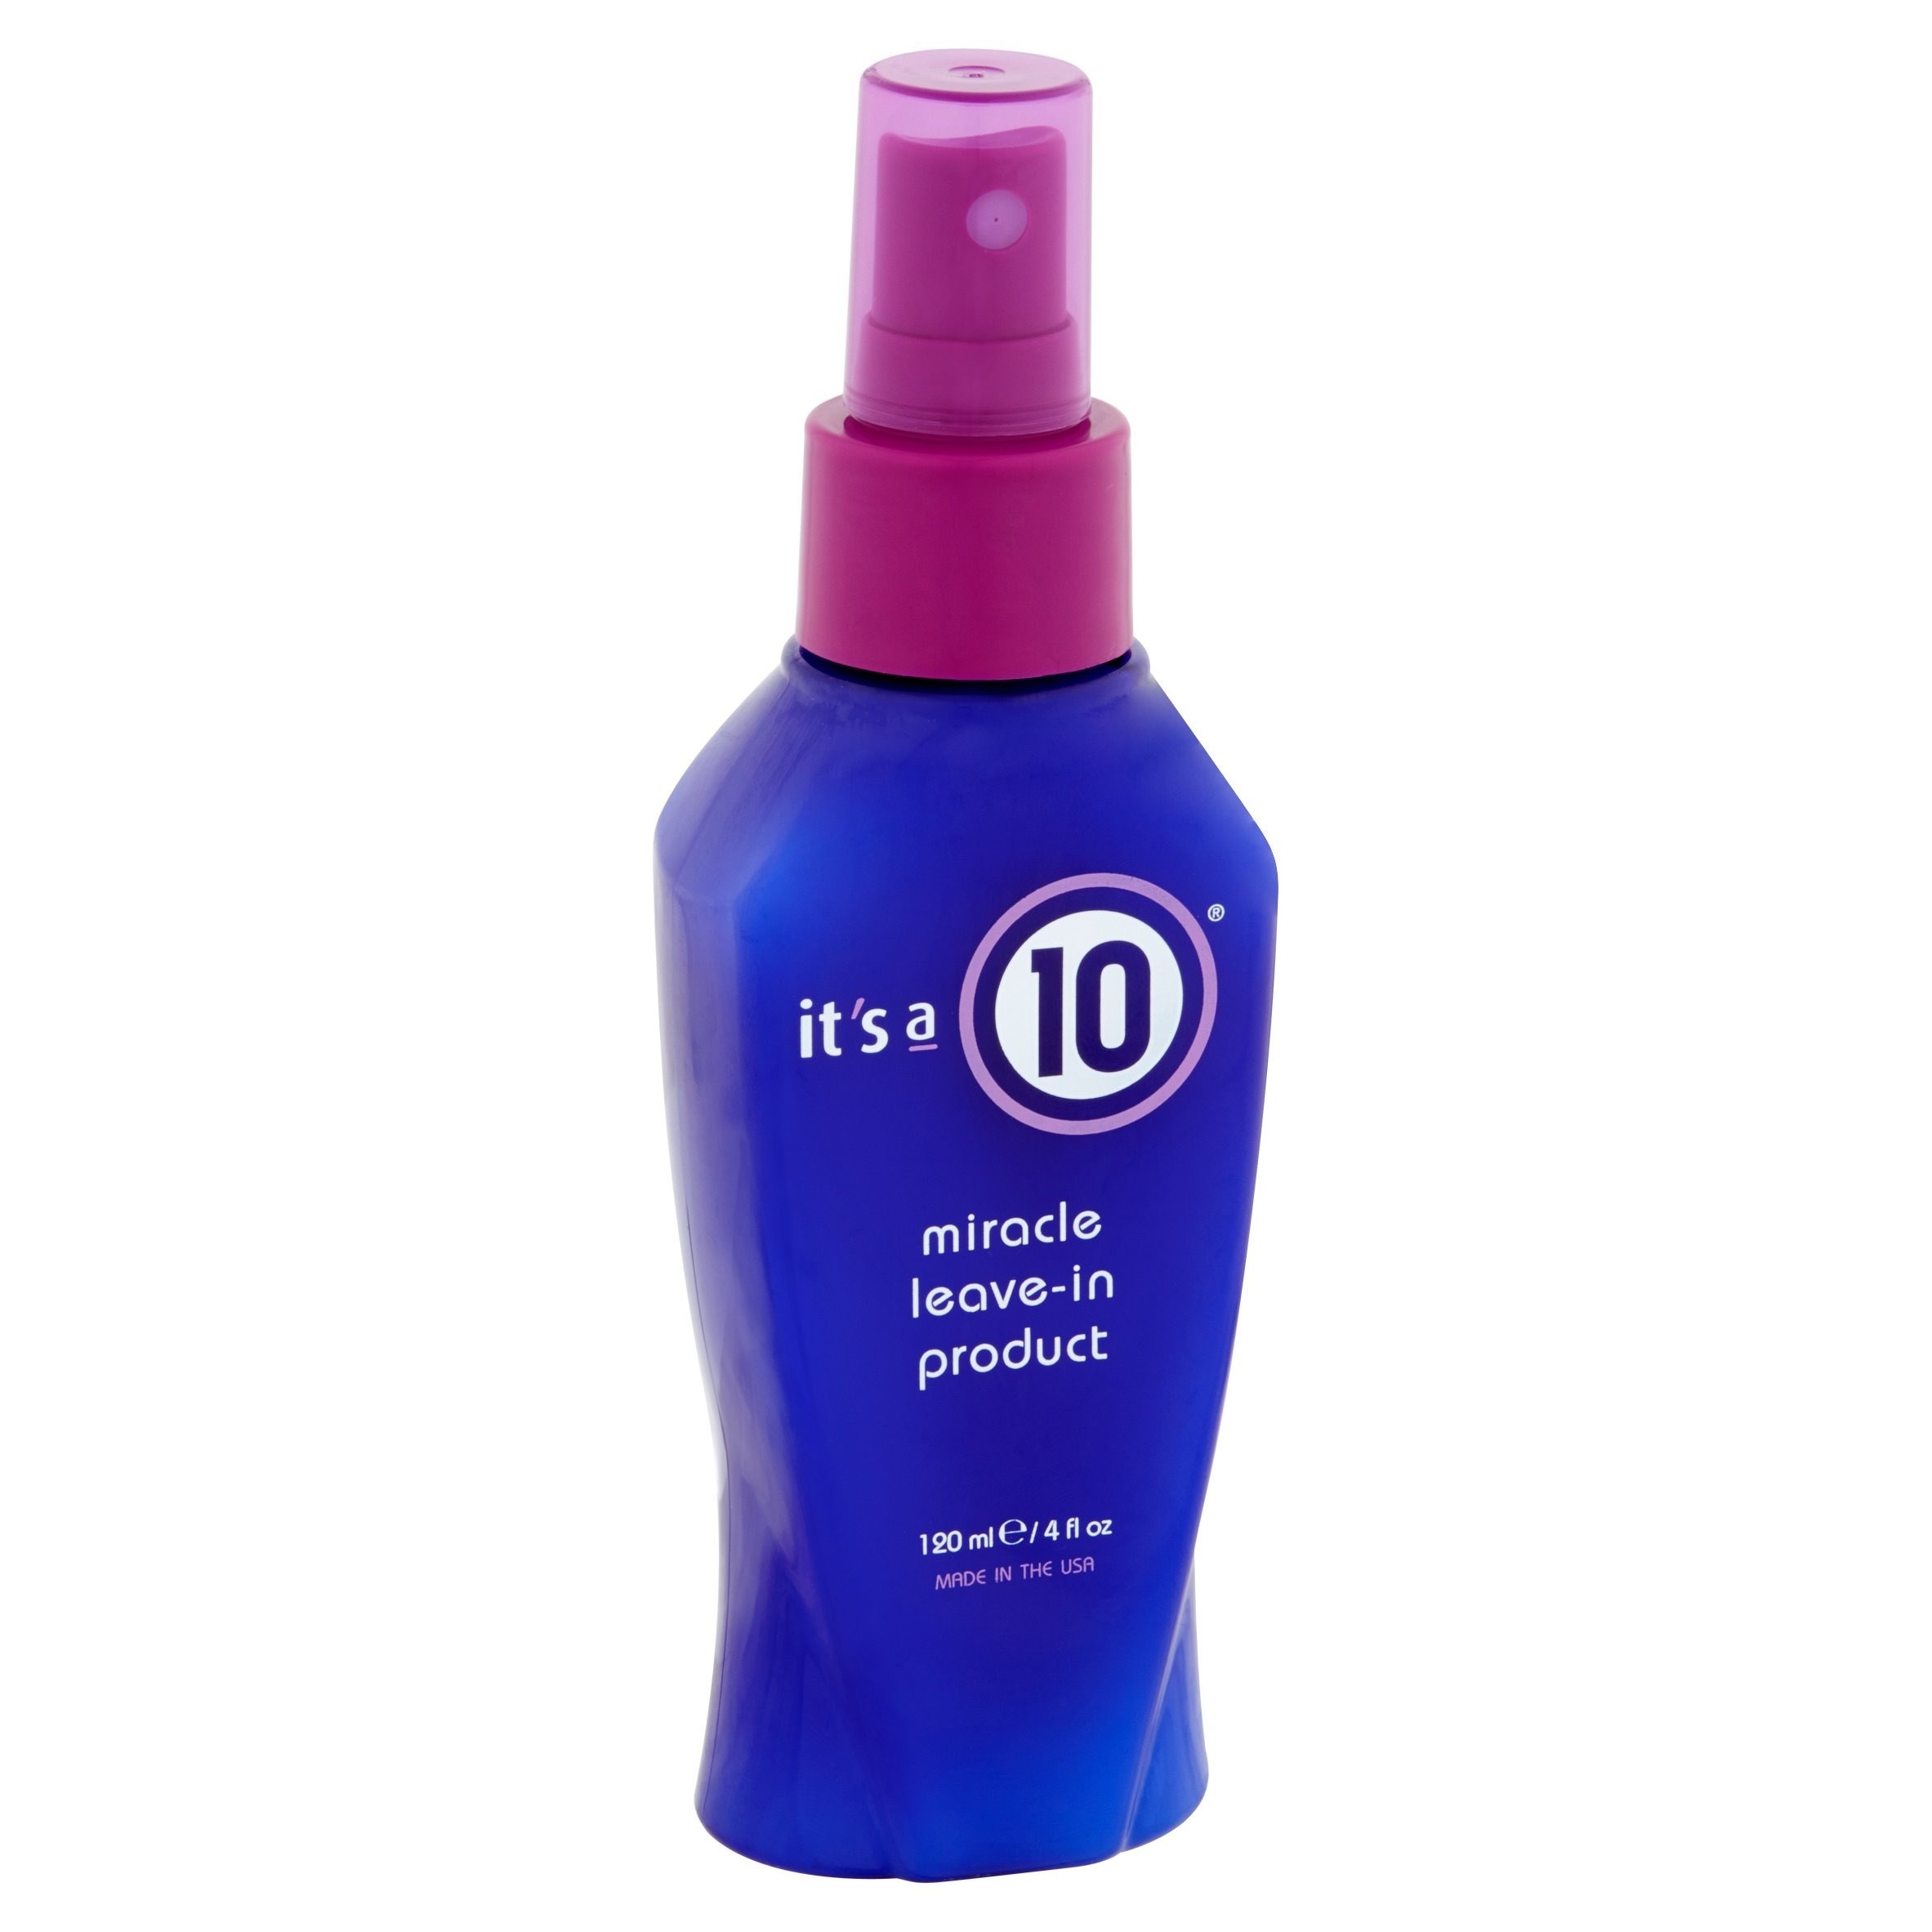 Blue bottle of hair product with a purple spray nozzle